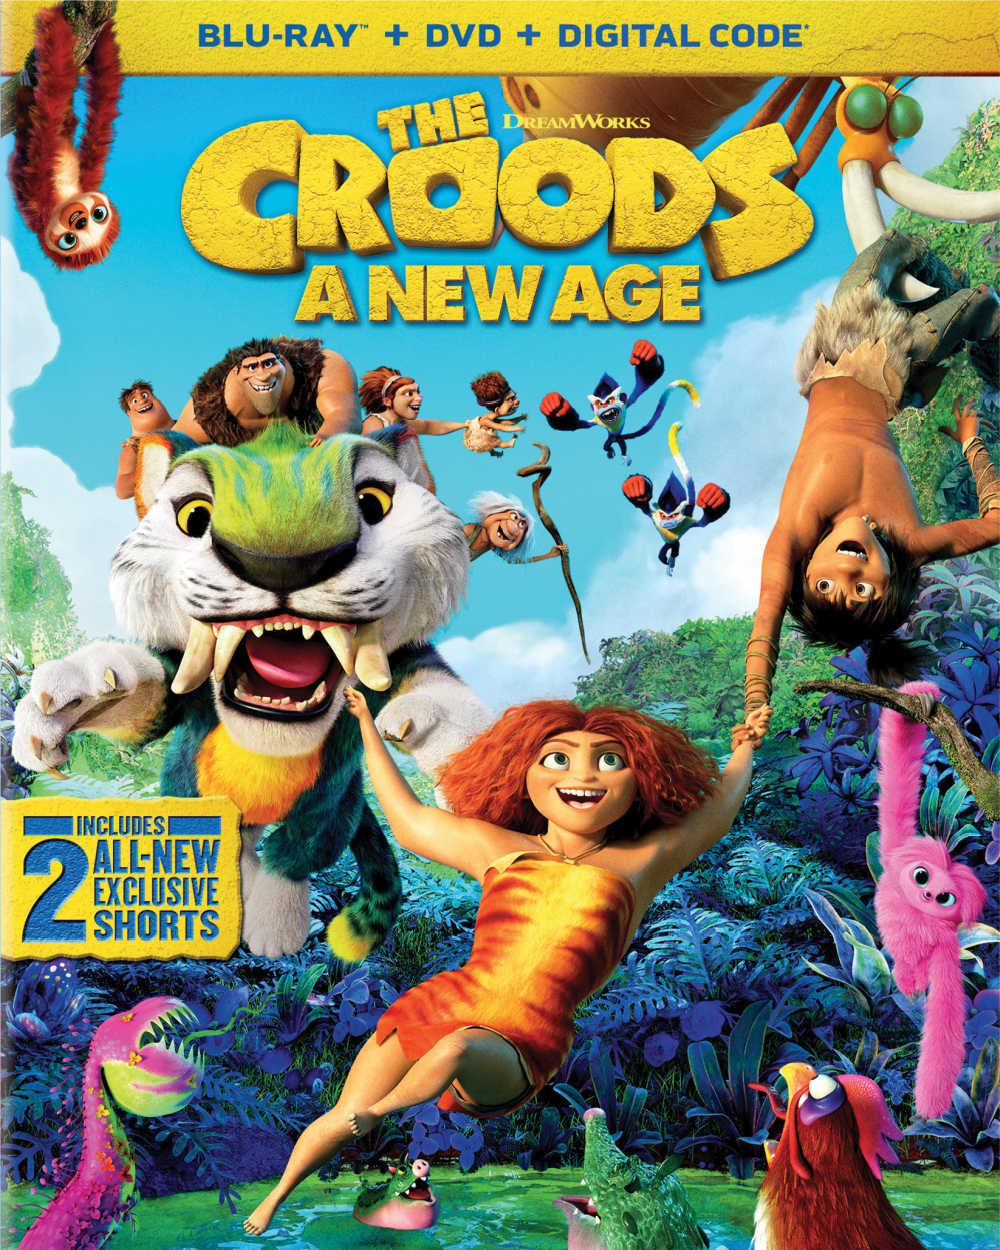 The newest Croods movie is coming to blu-ray, DVD and digital, so you will want to plan to watch it with your family again and again. 